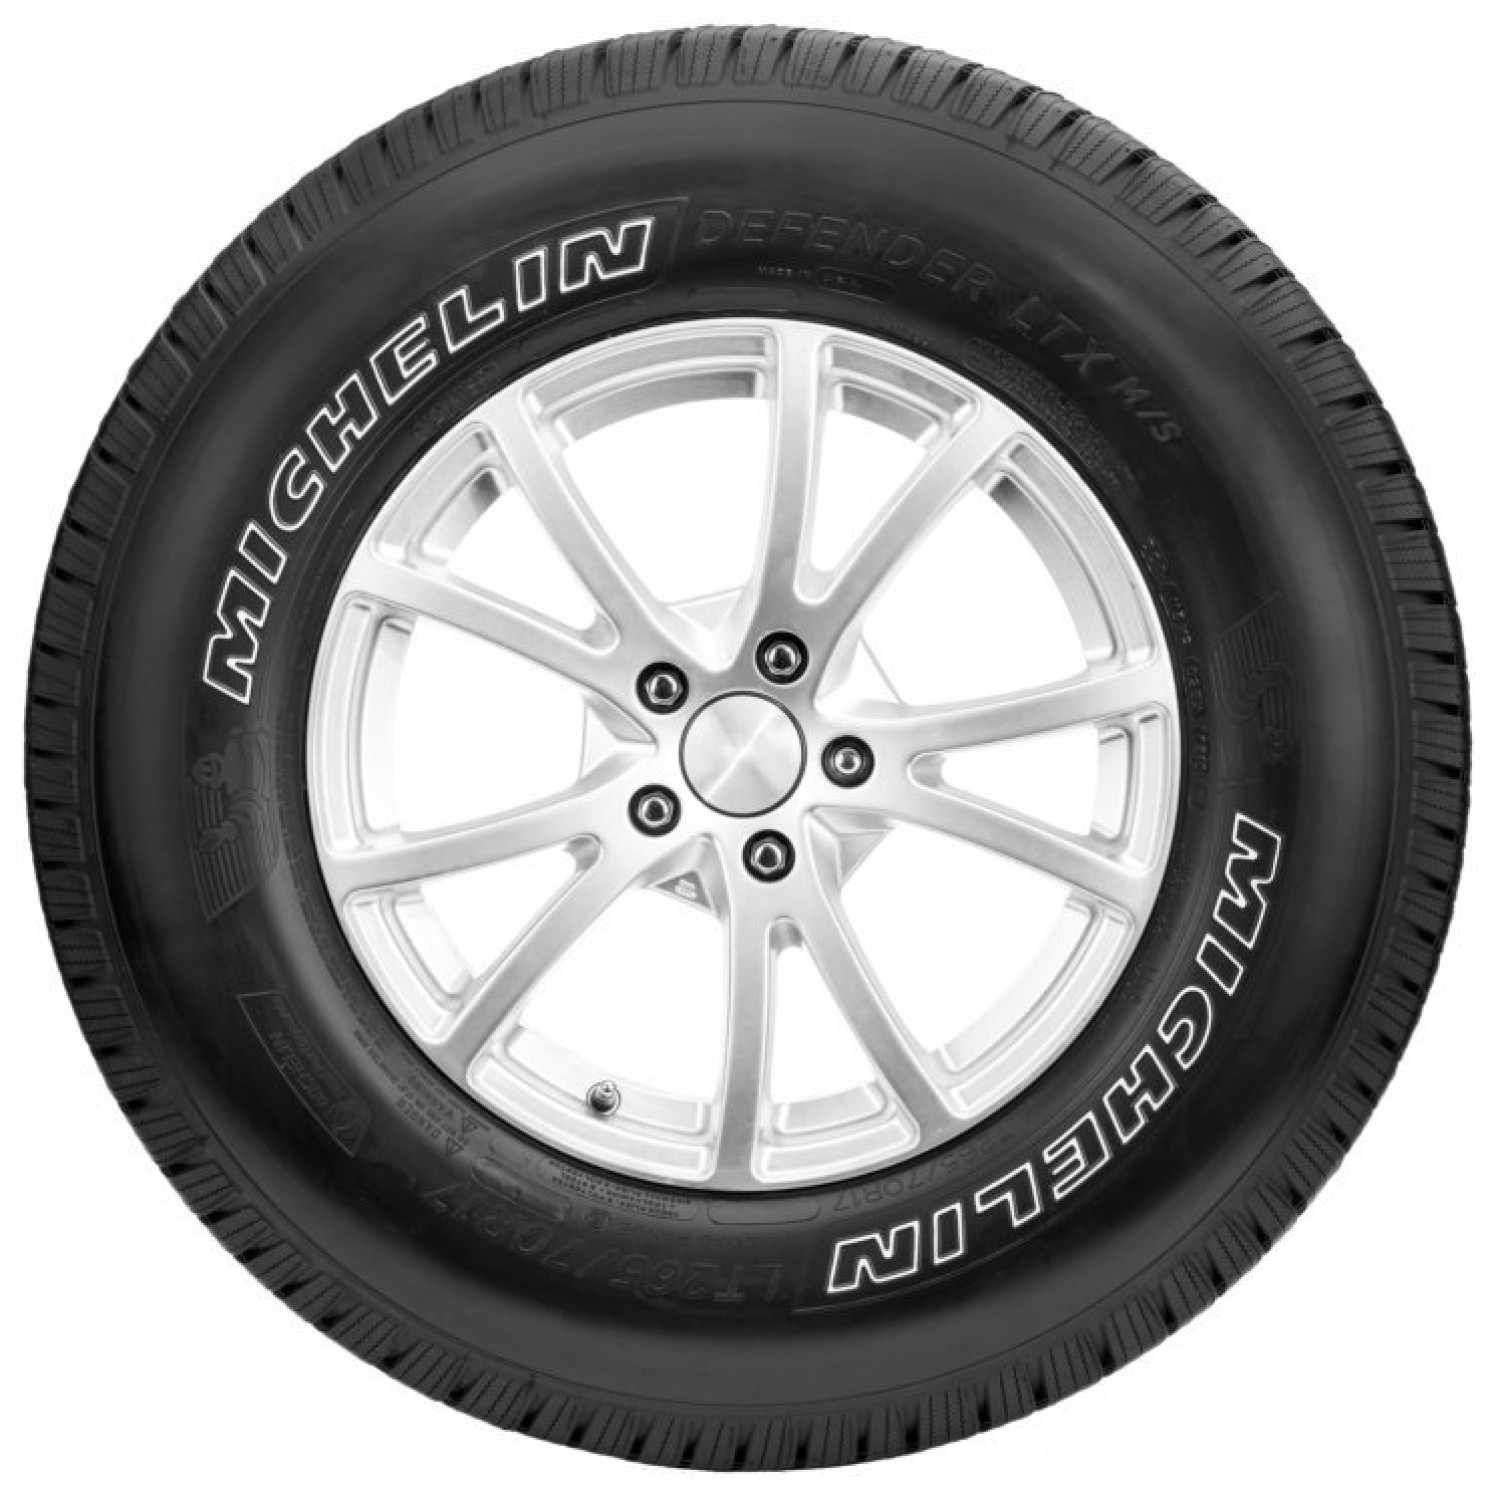 michelin-defender-ltx-ms-outlined-raised-white-letters-tire-235-75r15